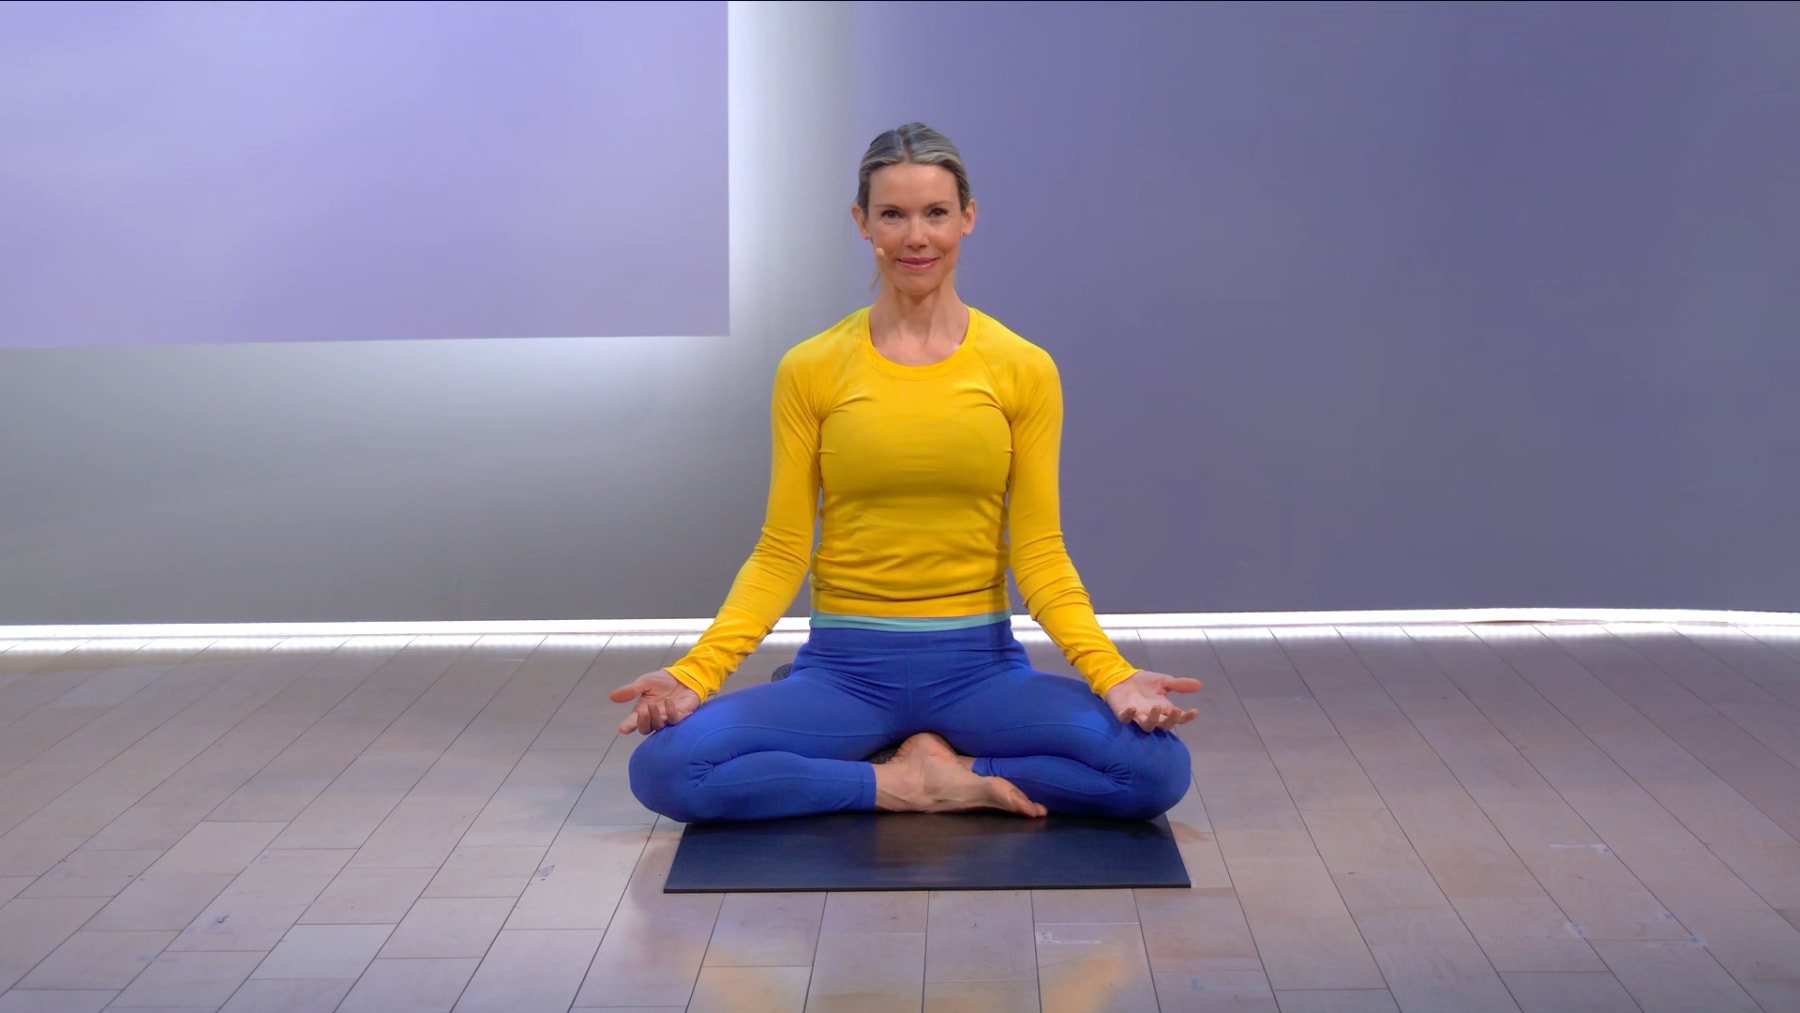 Break up your day with just 10 minutes of meditation. Peloton yoga